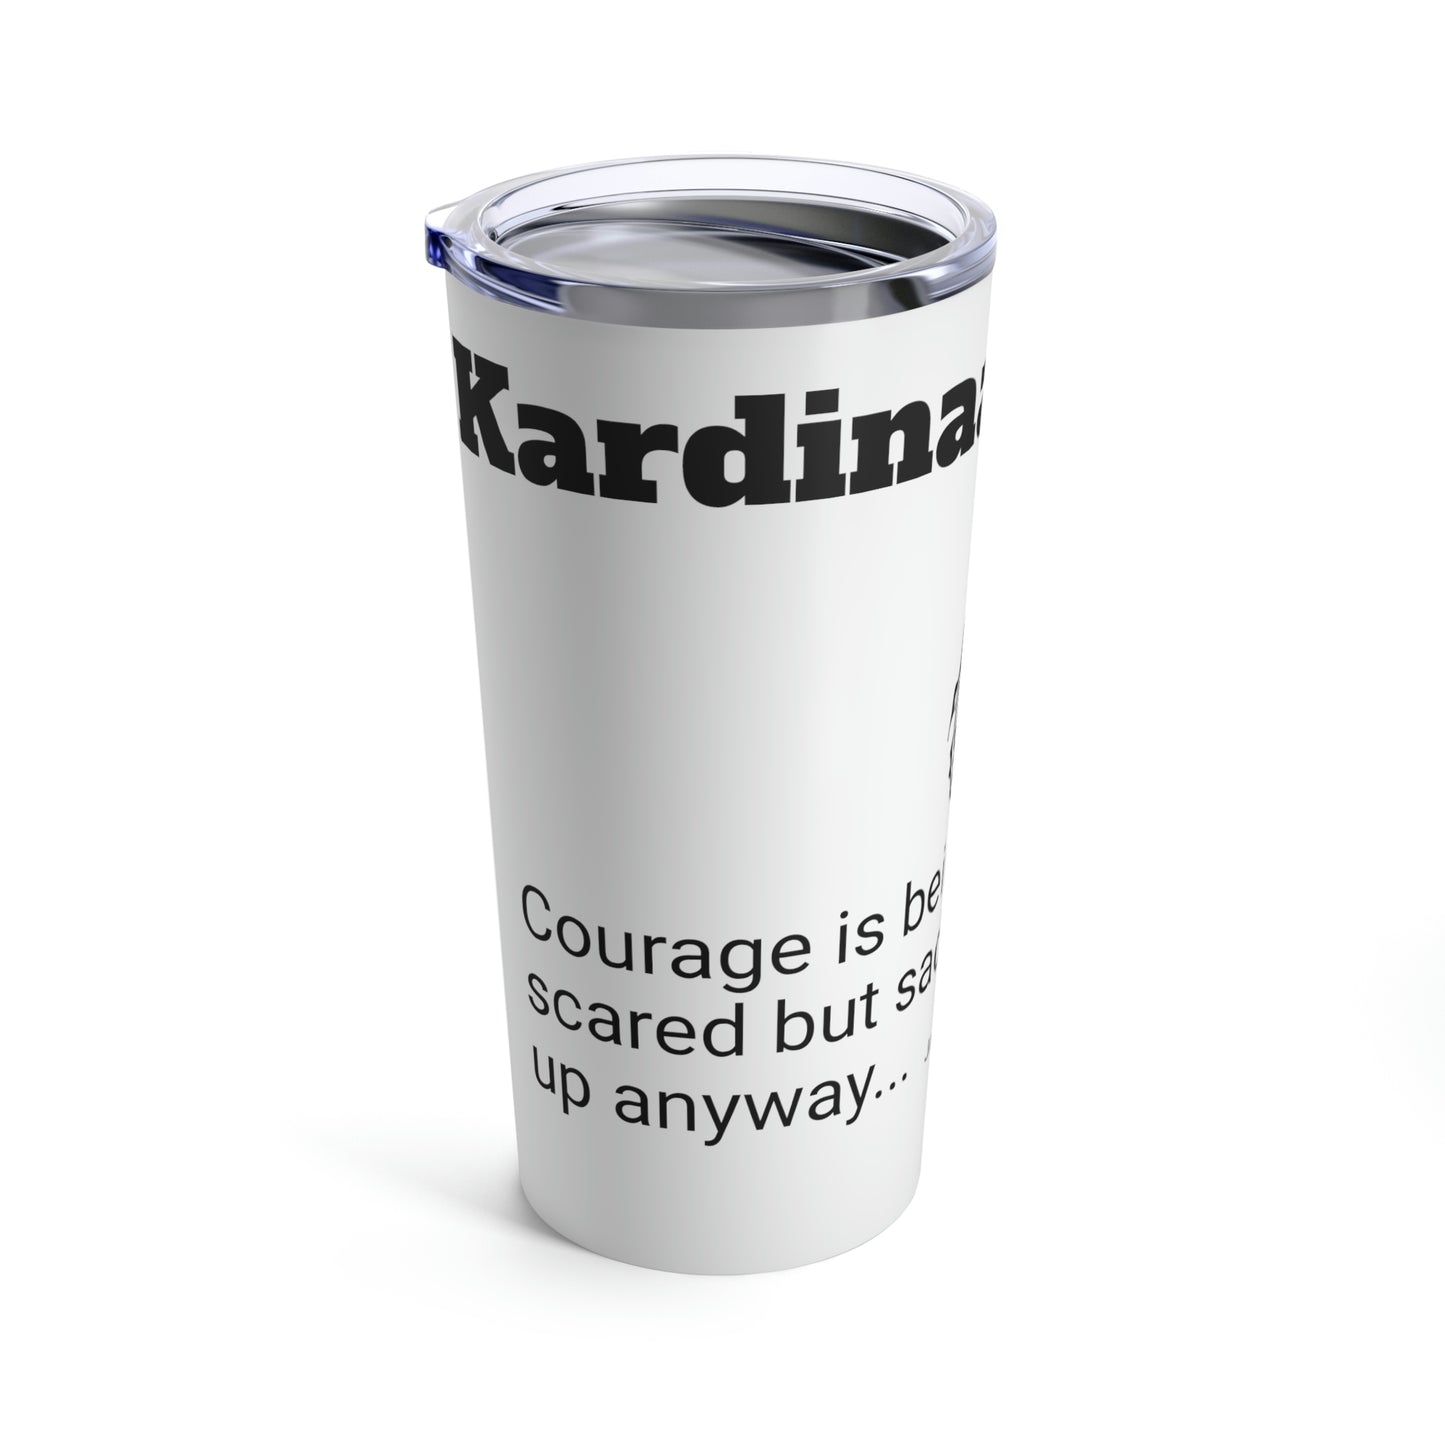 Buy an apple for Kardinaal, get a courage tumbler and video.